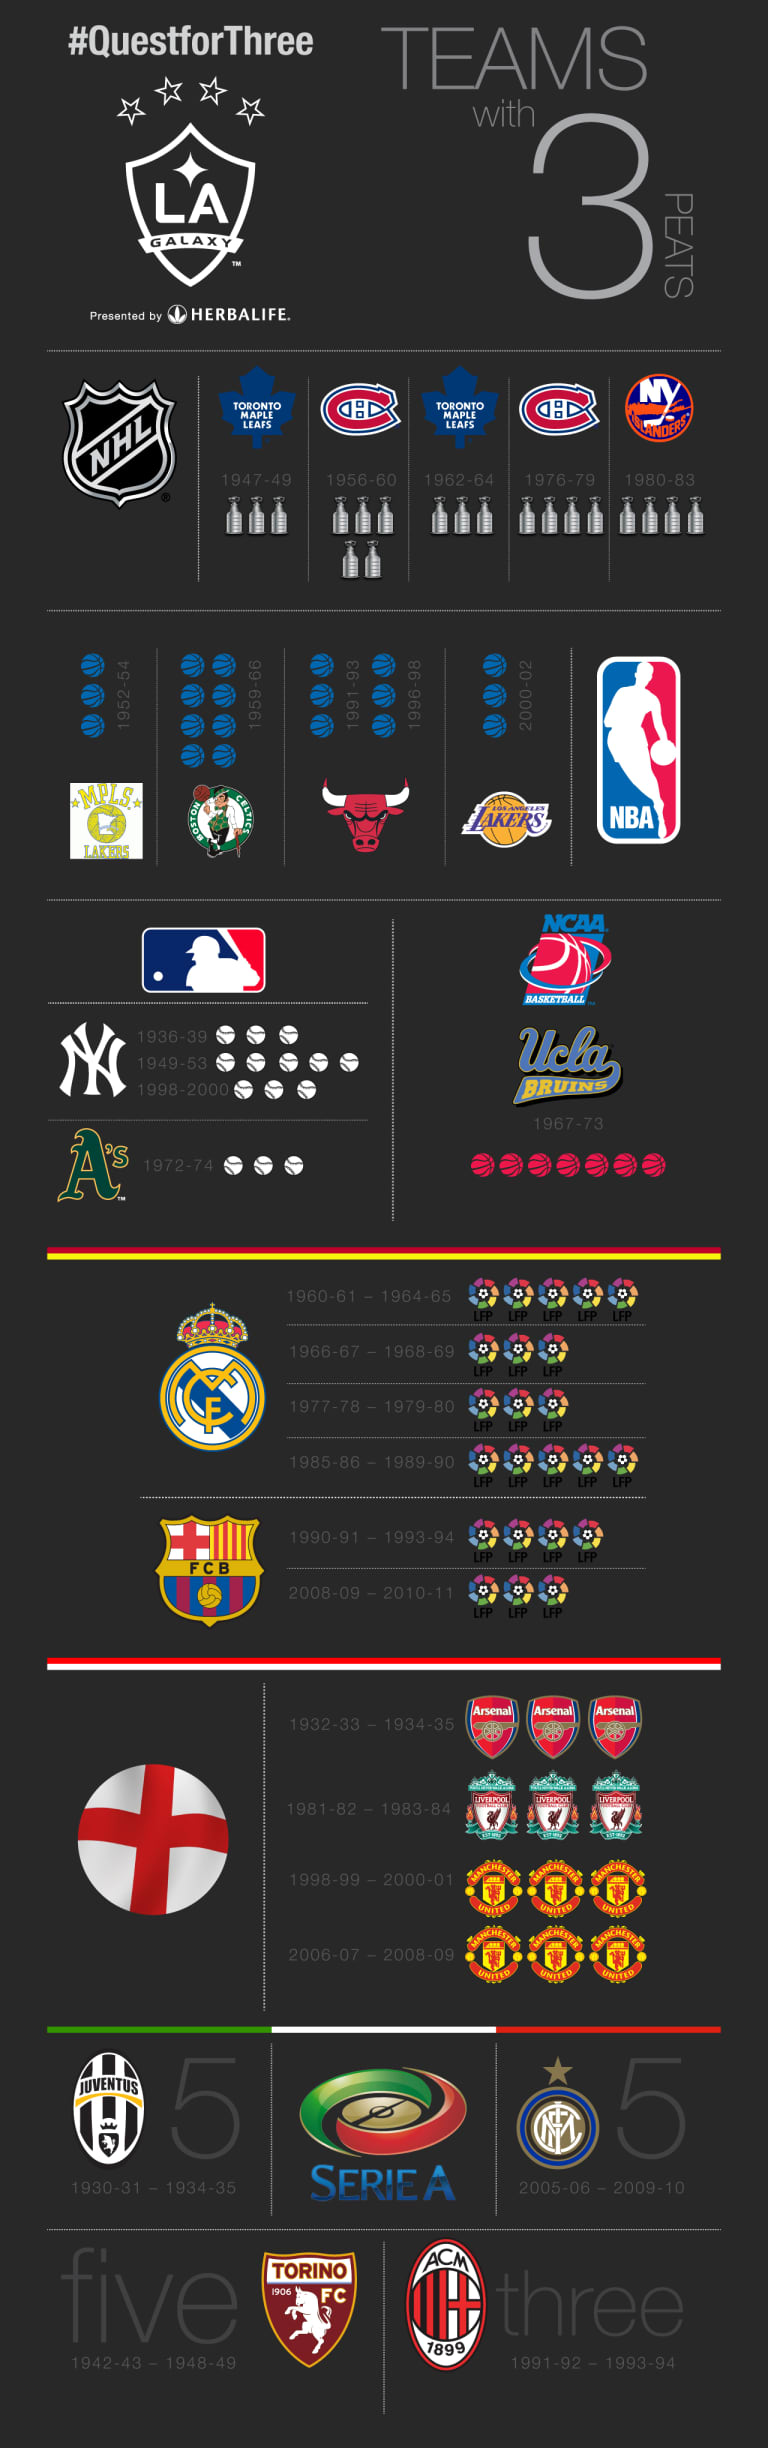 Threepeats by the Numbers: A look at consecutive titles across the sports world -